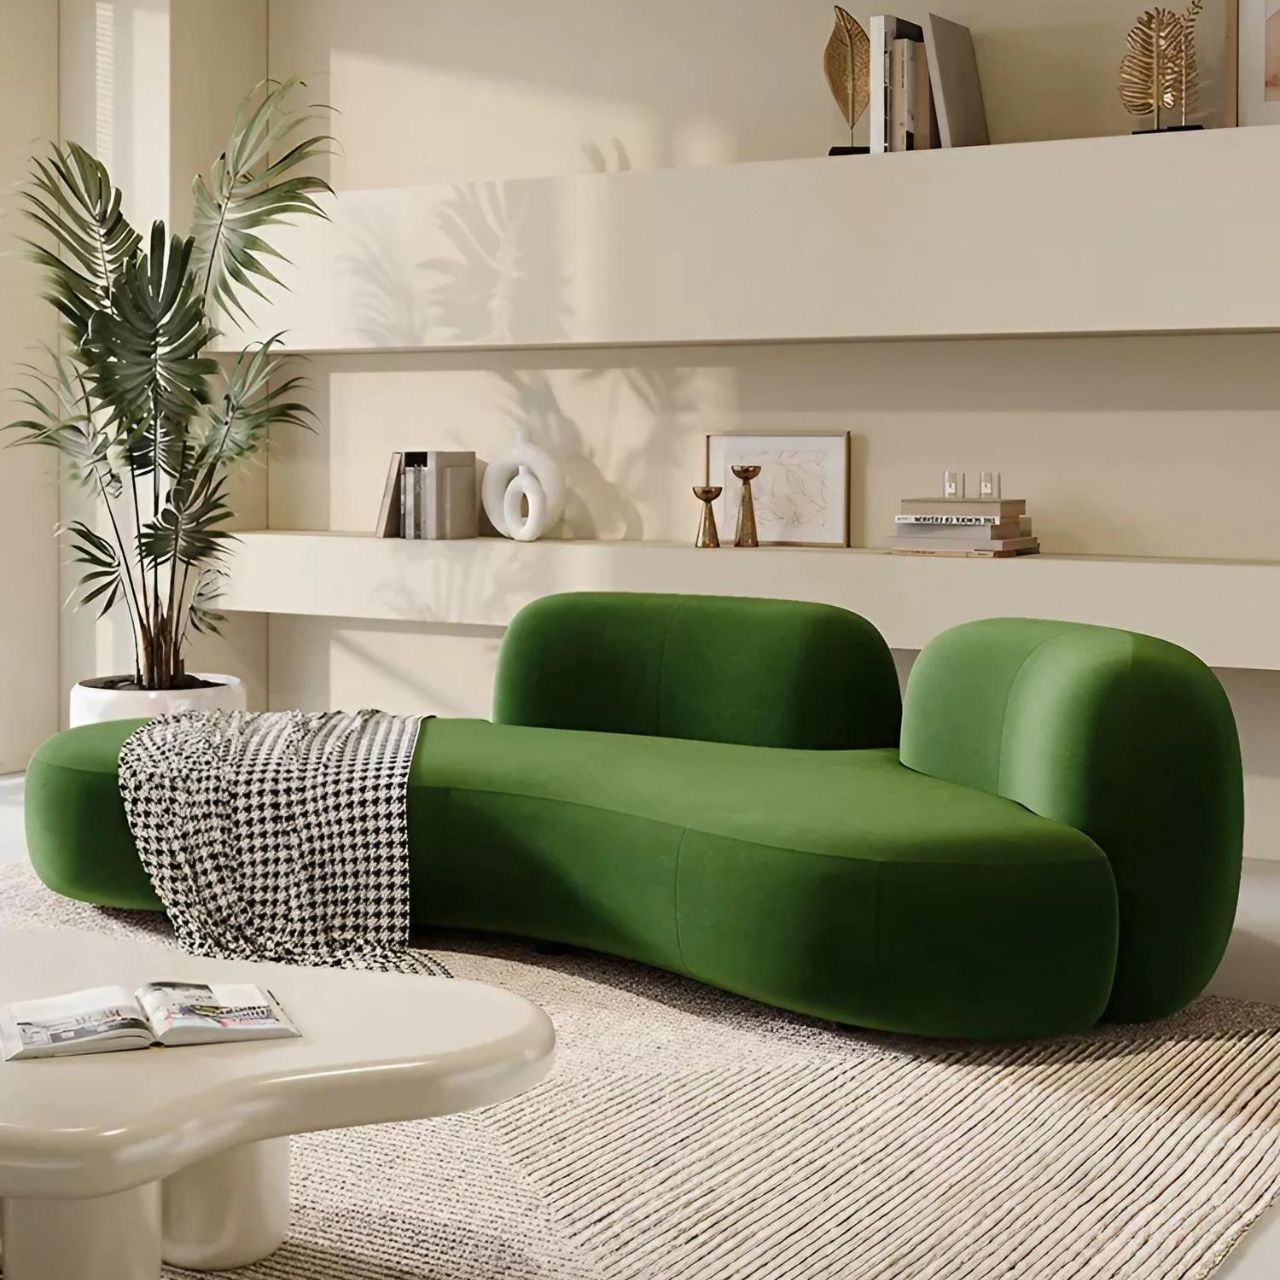 Elegant green matte velvet curved multi-seater lounge couch in a creative design